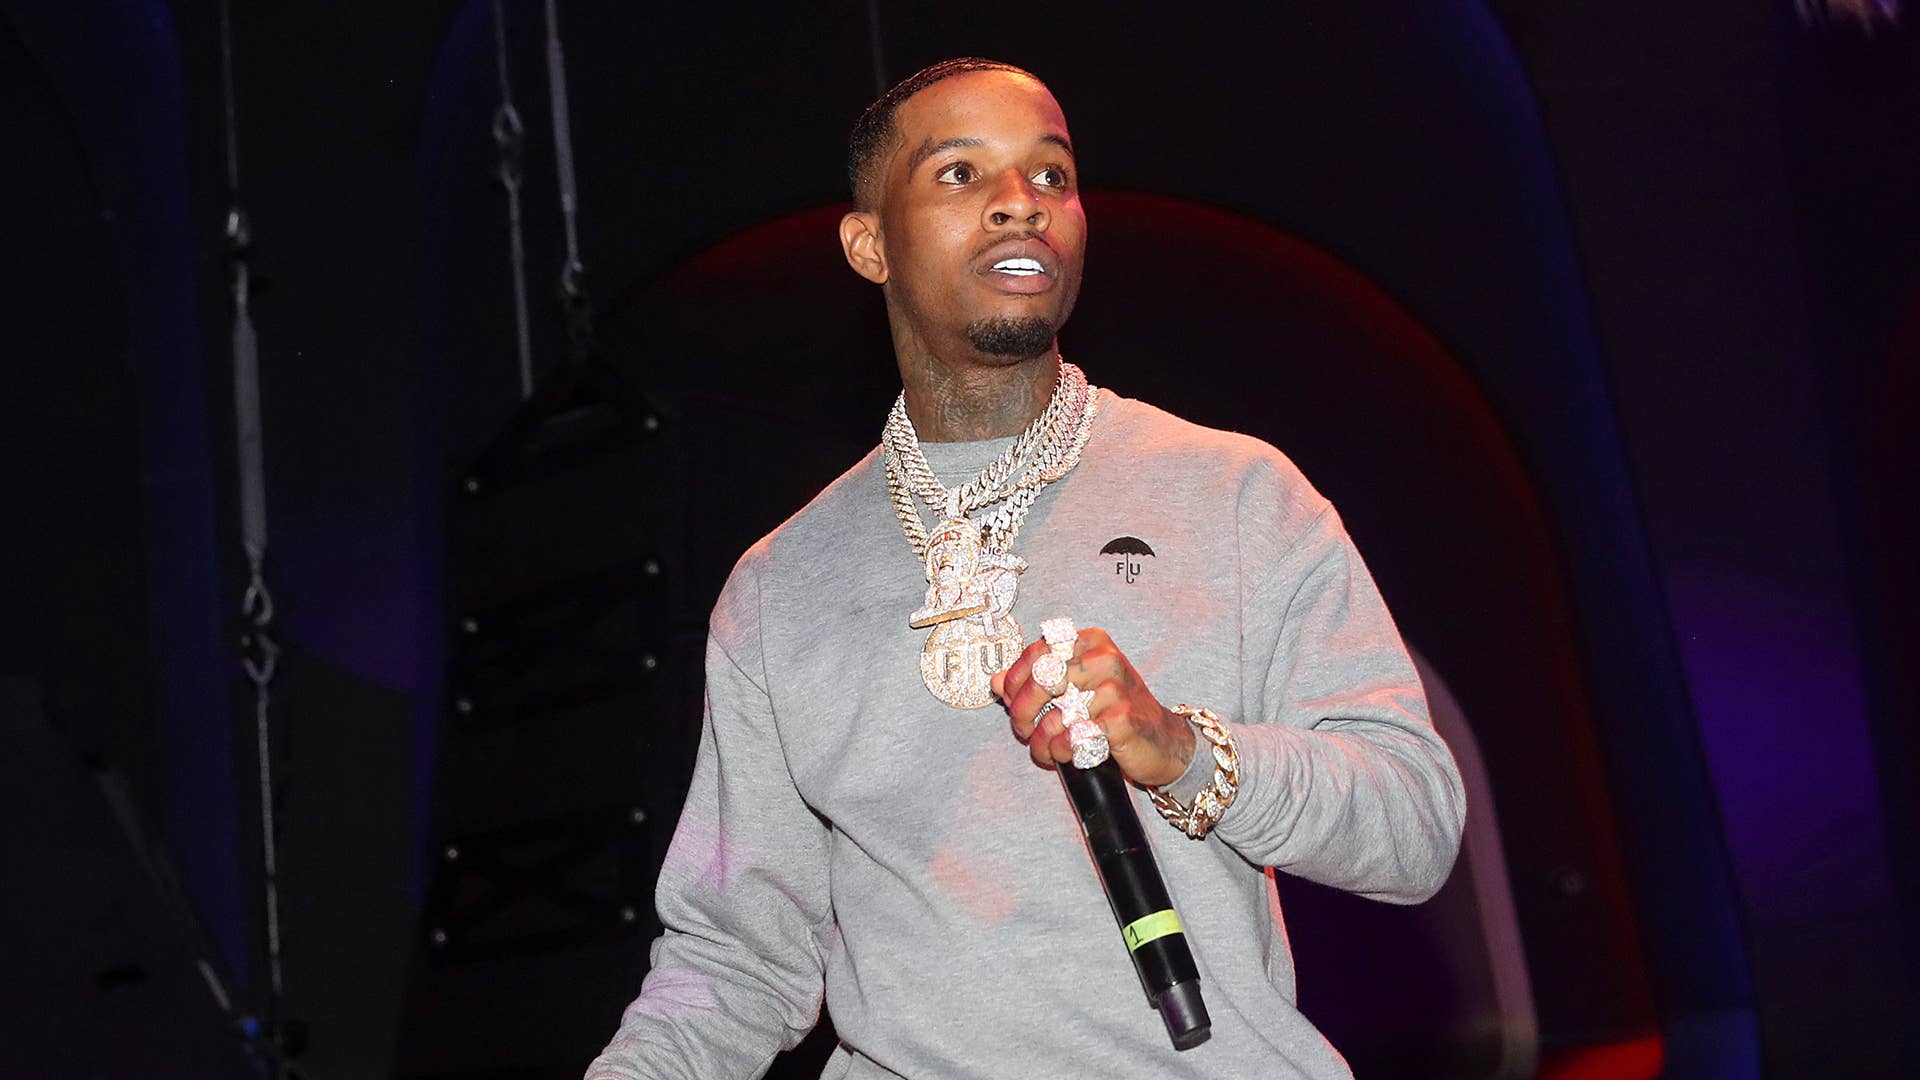 Tory Lanez performs onstage during Celebrity Sports Entertainment Presents Tory Lanez & Jen Selter at DAER Nightclub